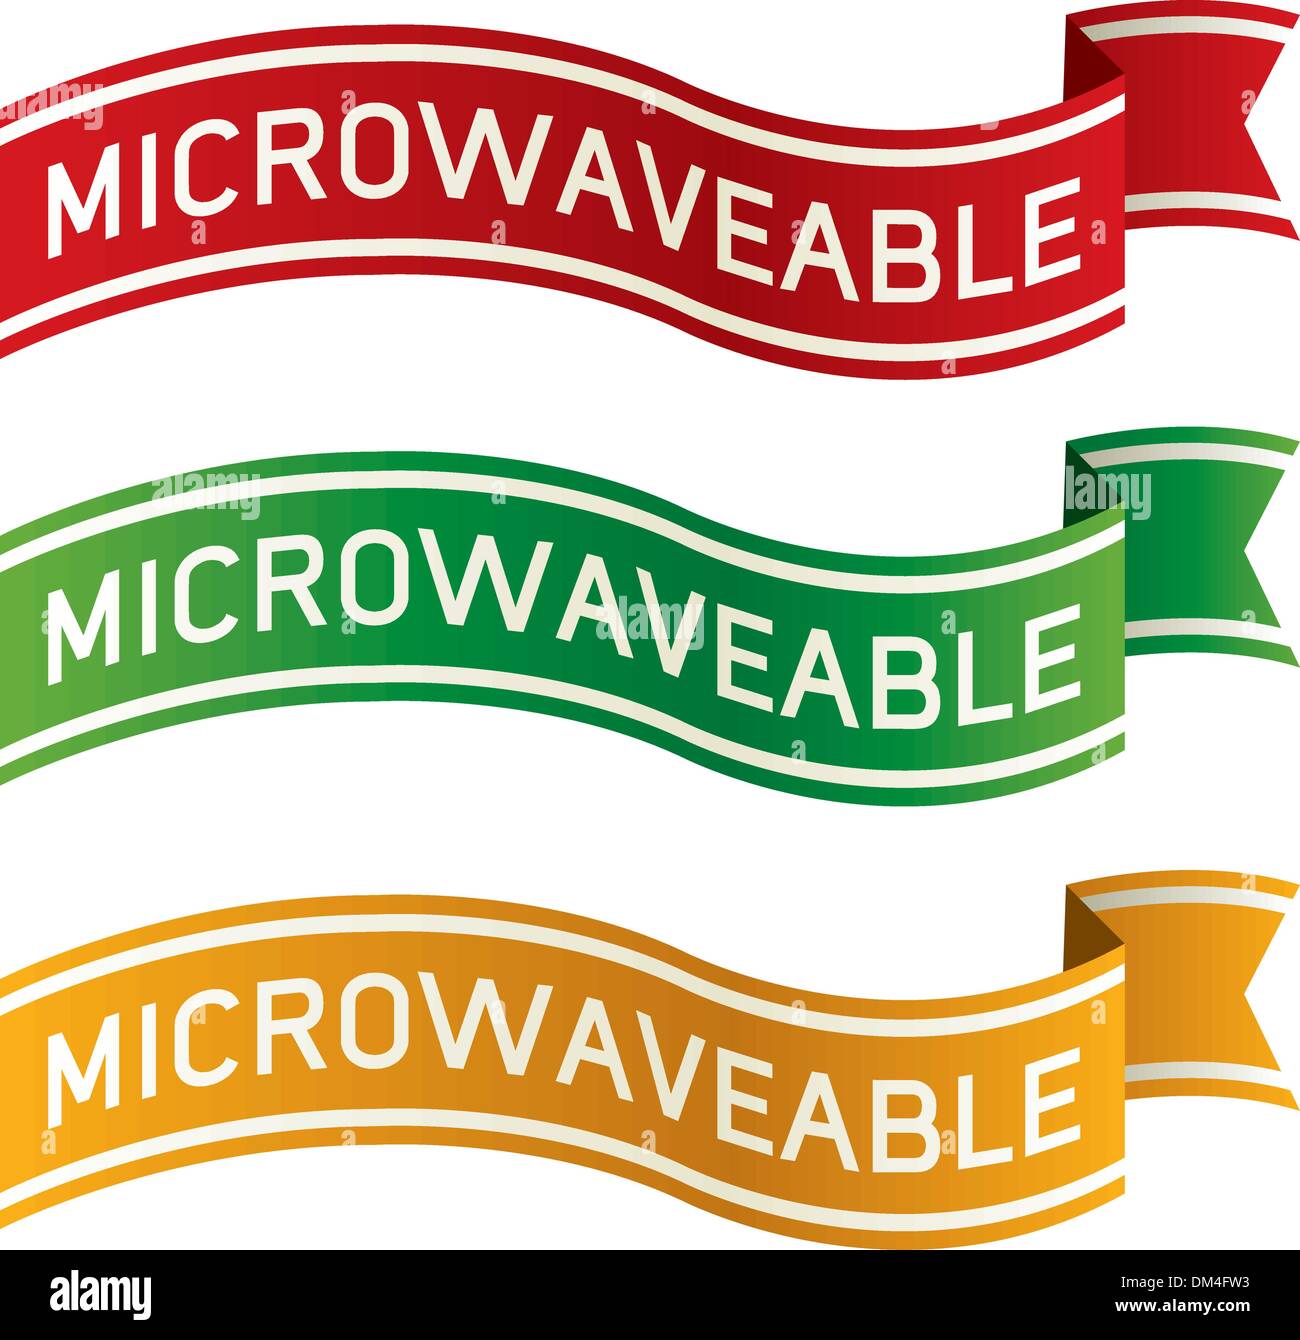 Microwaveable food label ribbon Stock Vector